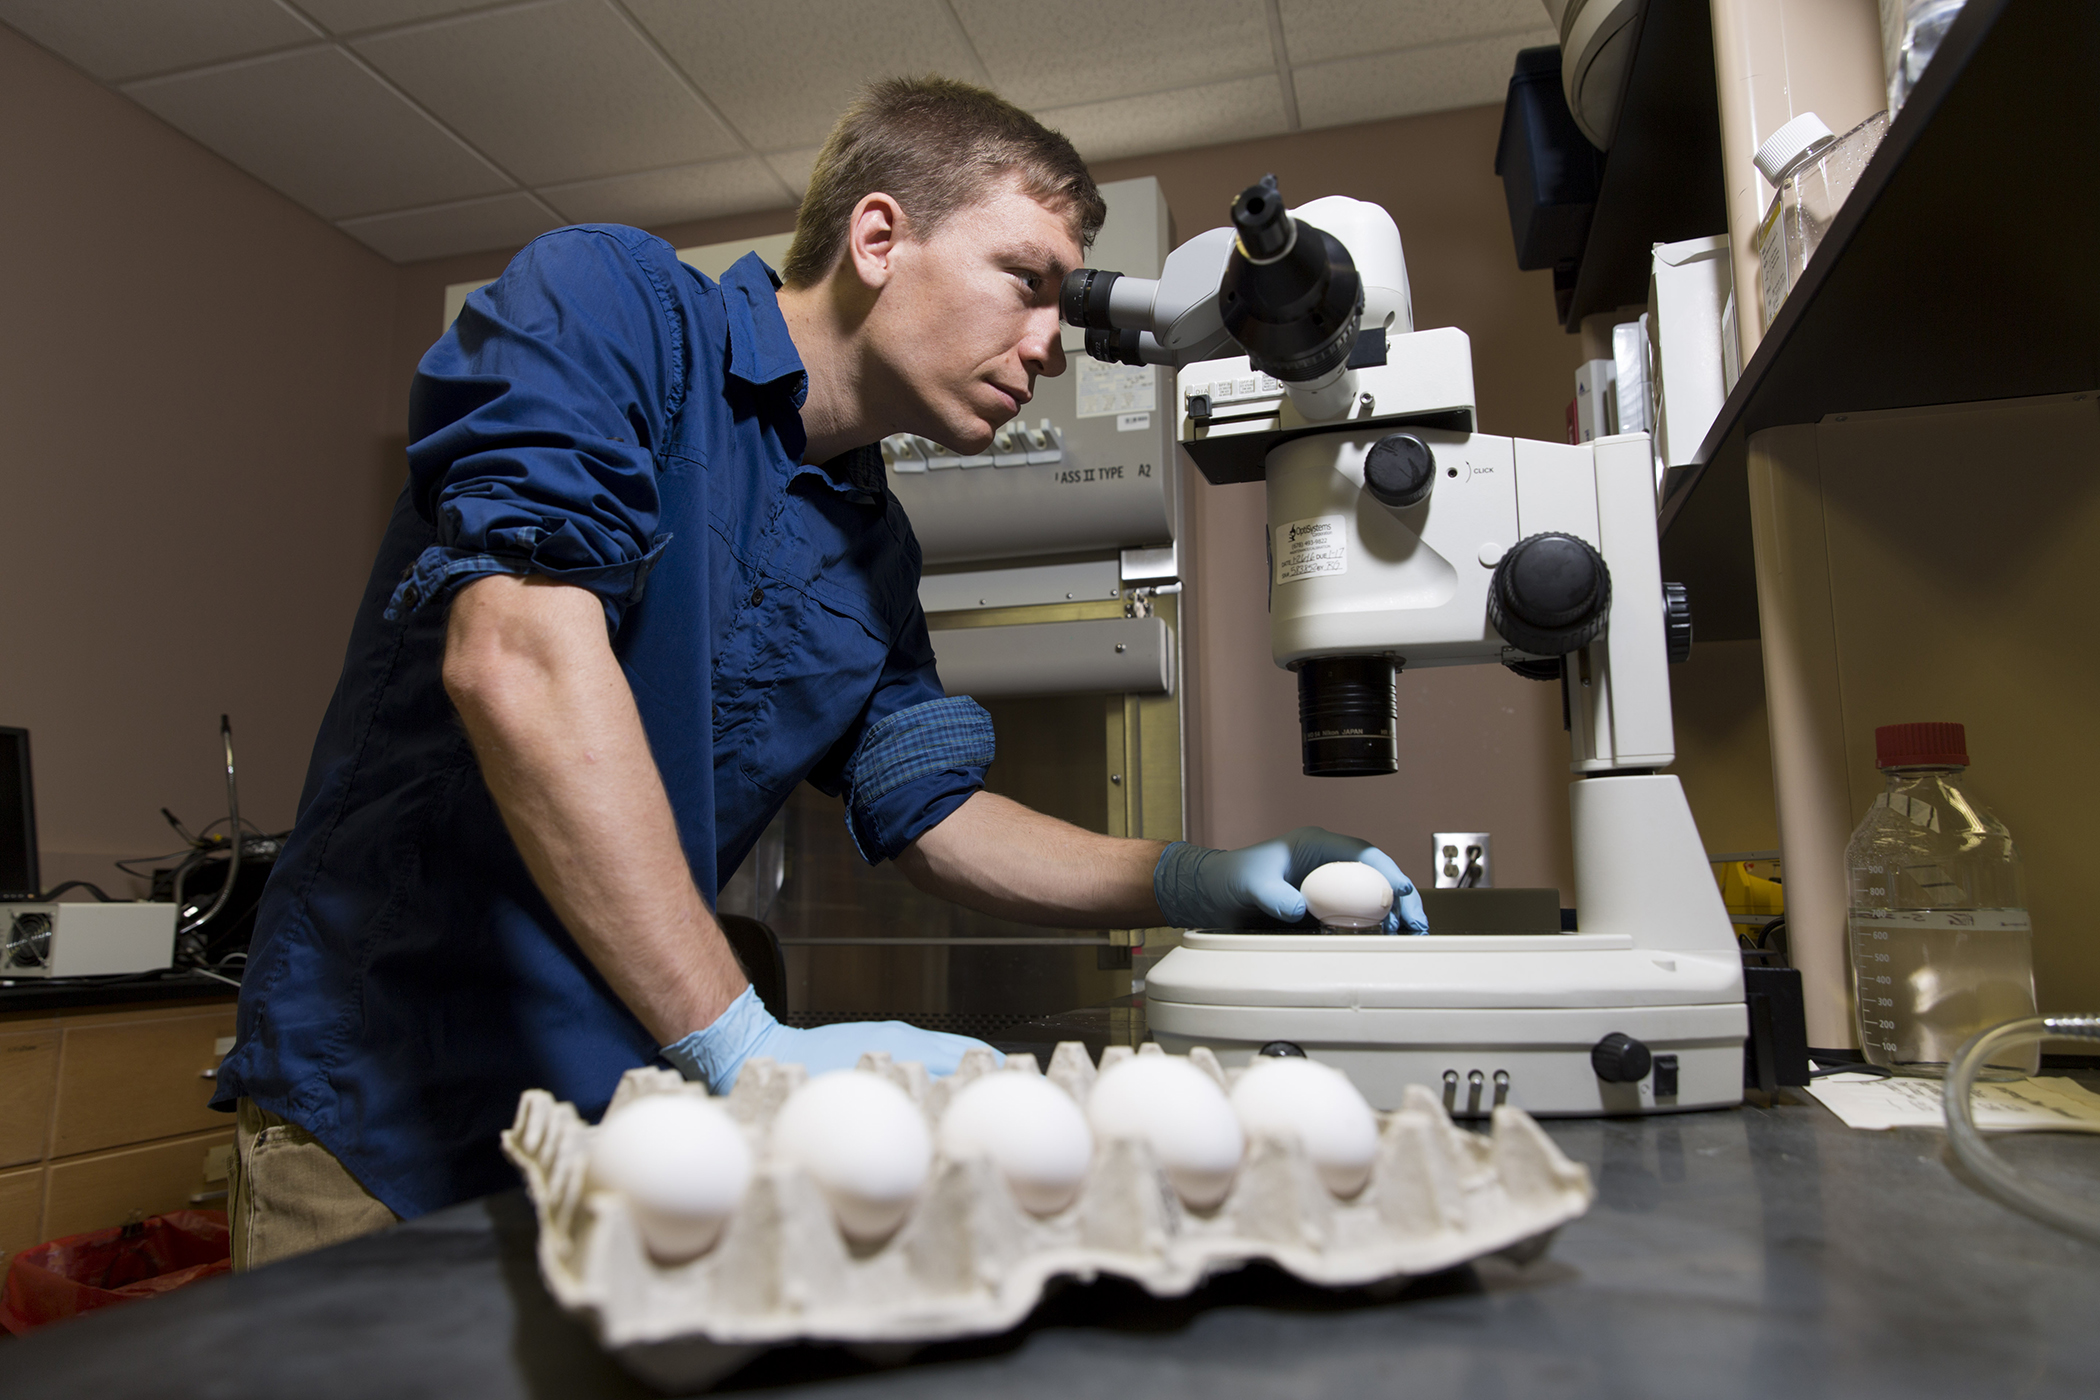 Graduate student Forrest Goodfellow looks into the top of an egg through a microscope